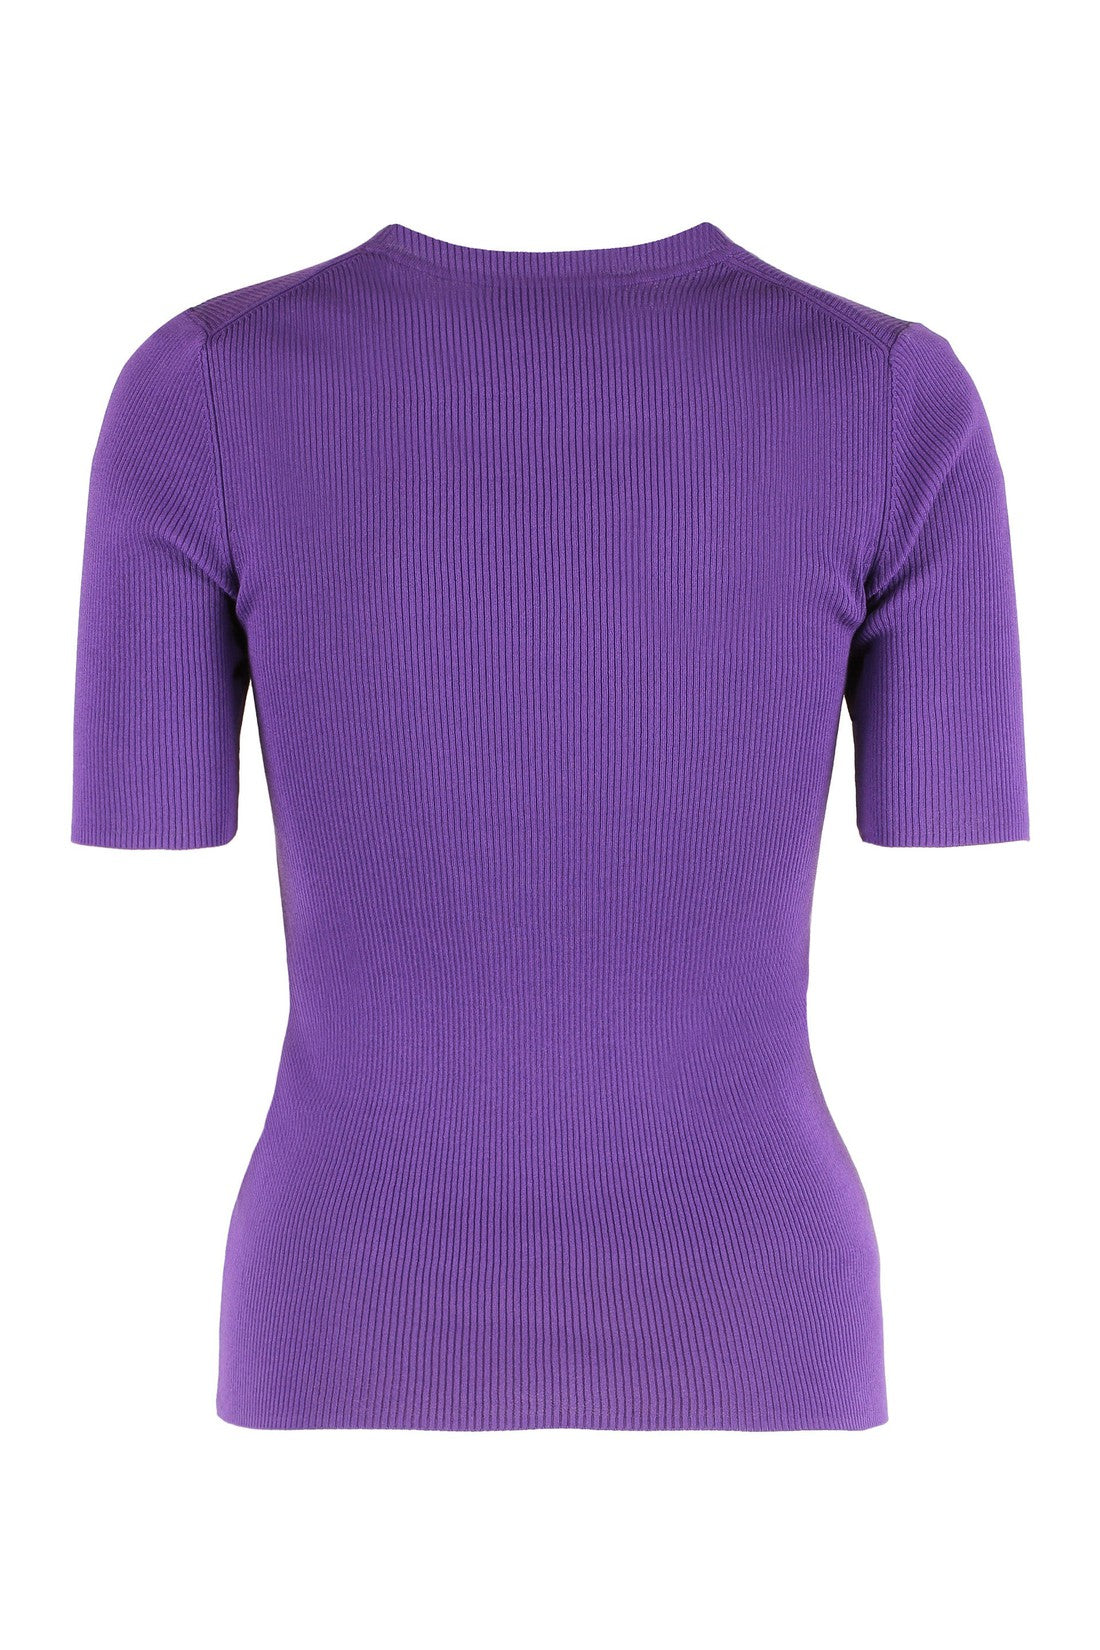 Parosh-OUTLET-SALE-Cipria knitted top-ARCHIVIST